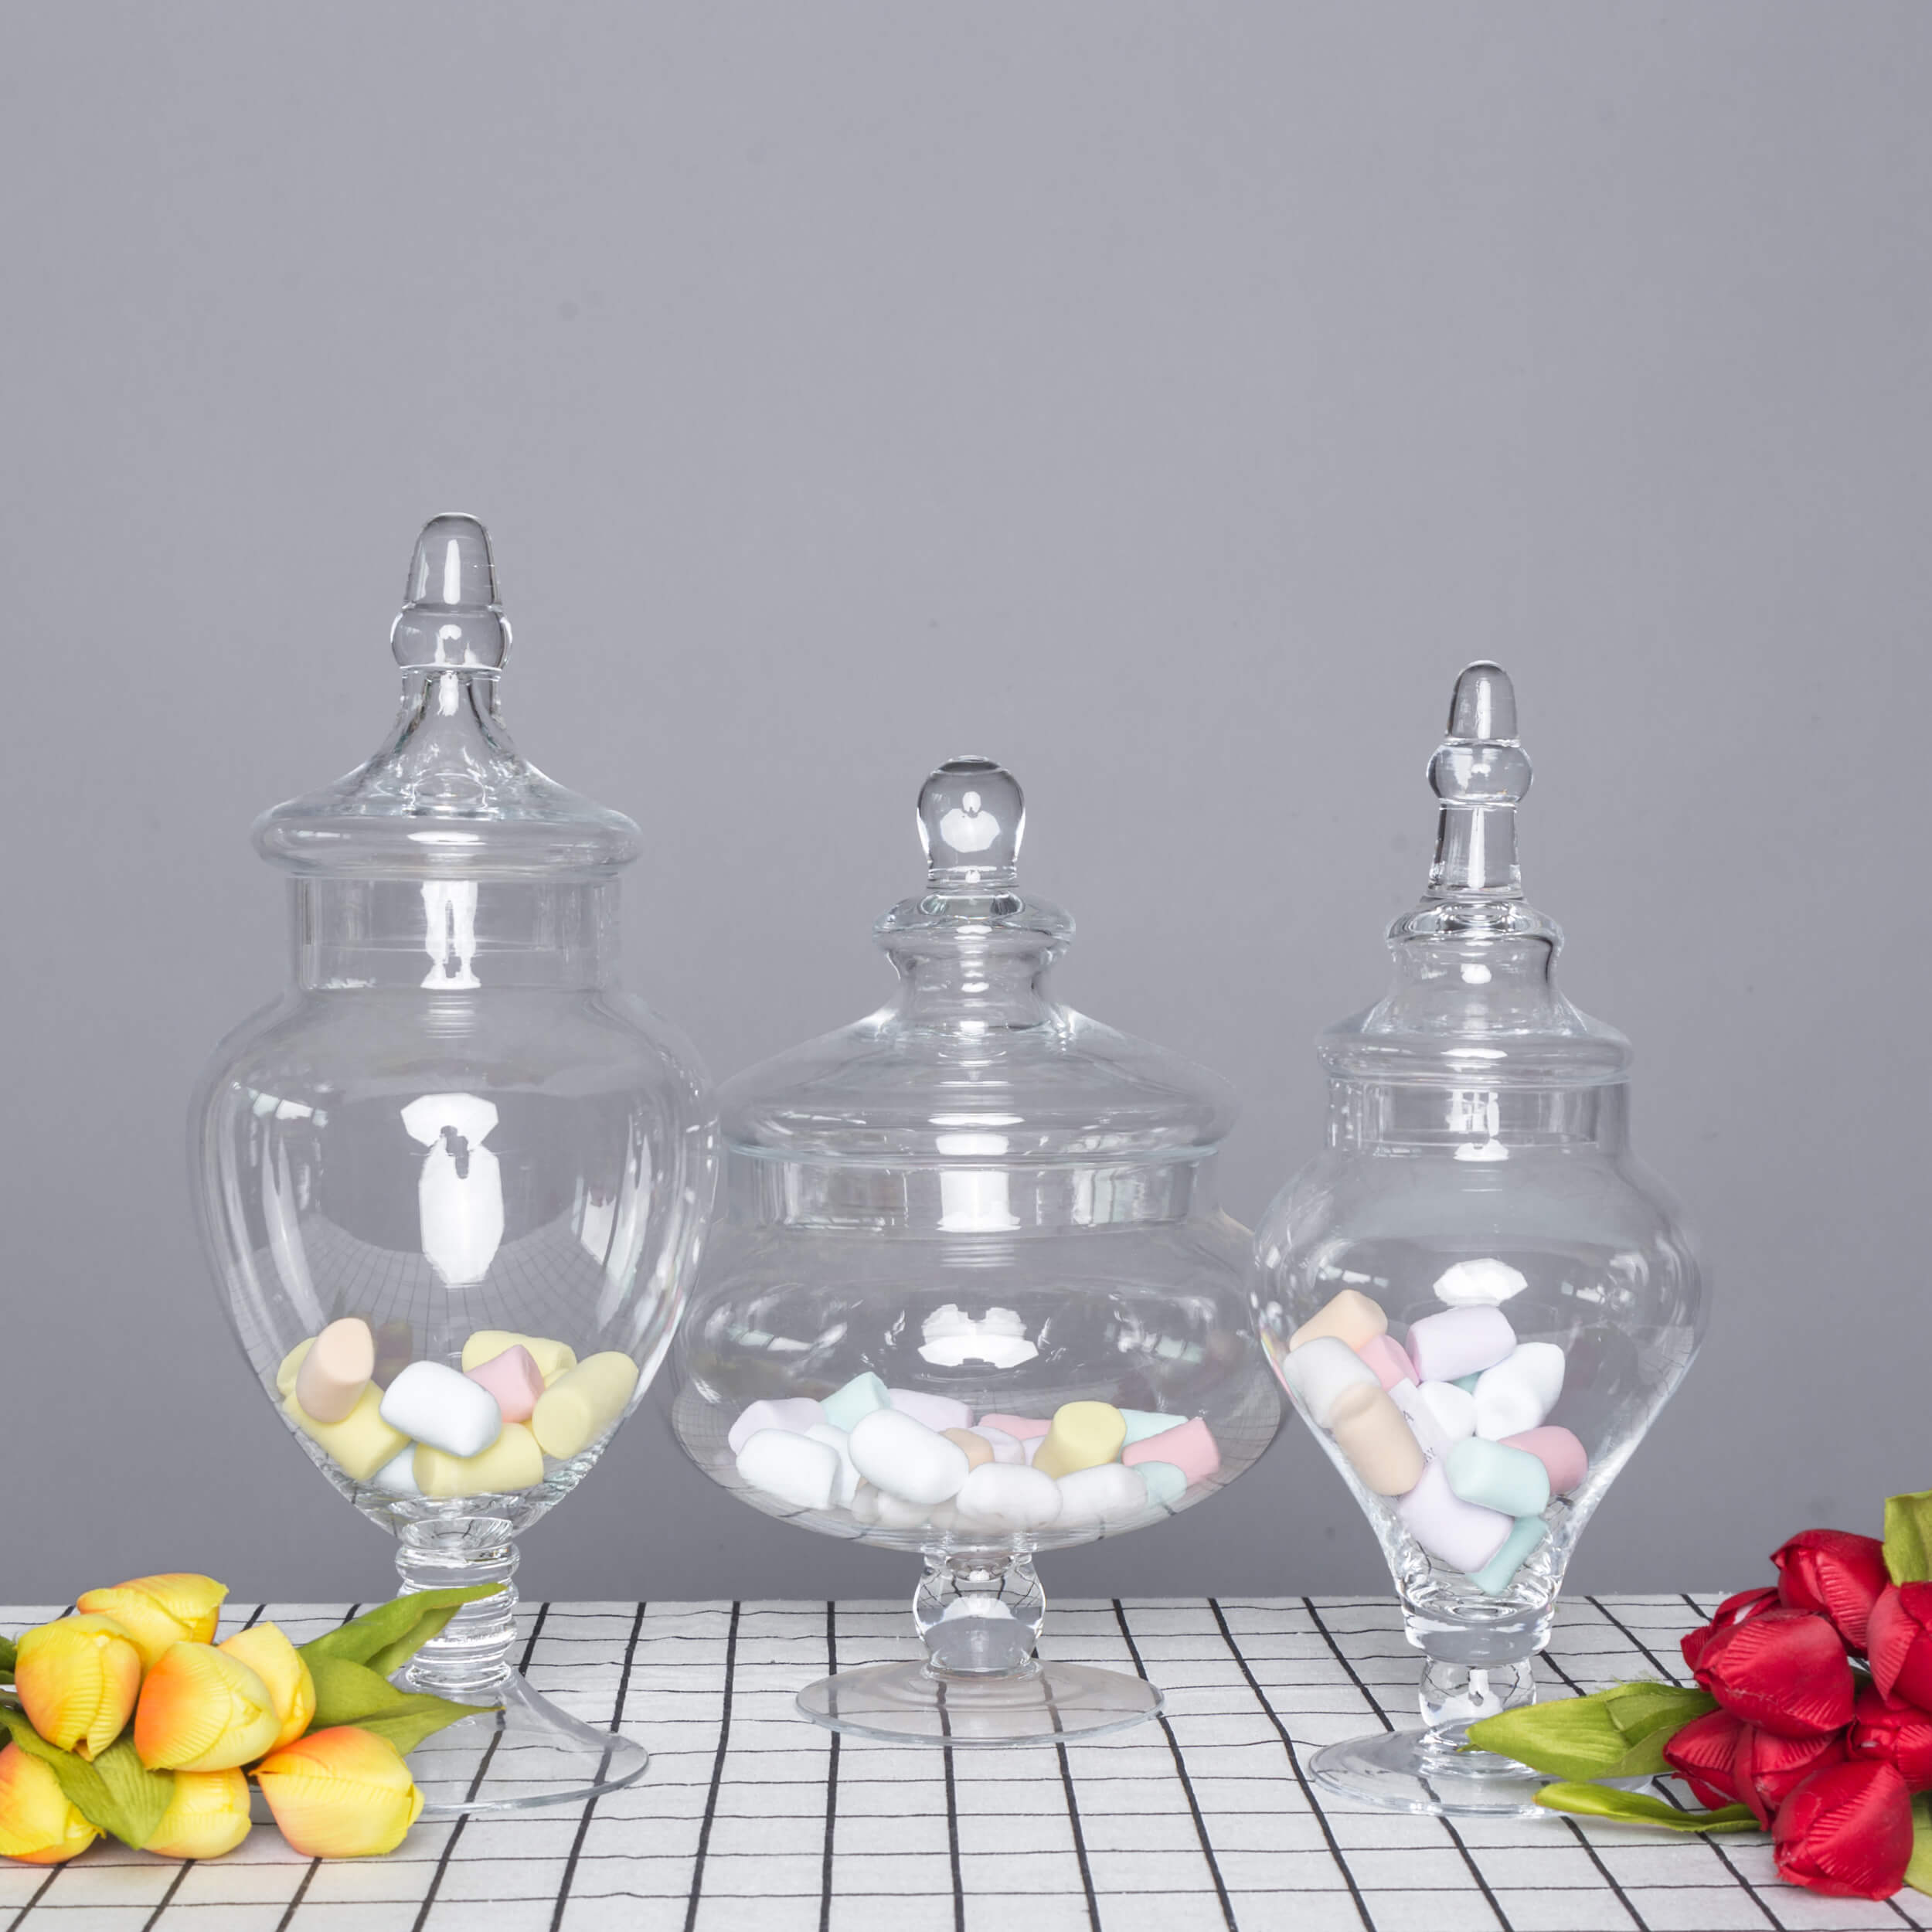 Set of 3 Glass Apothecary Candy Jars